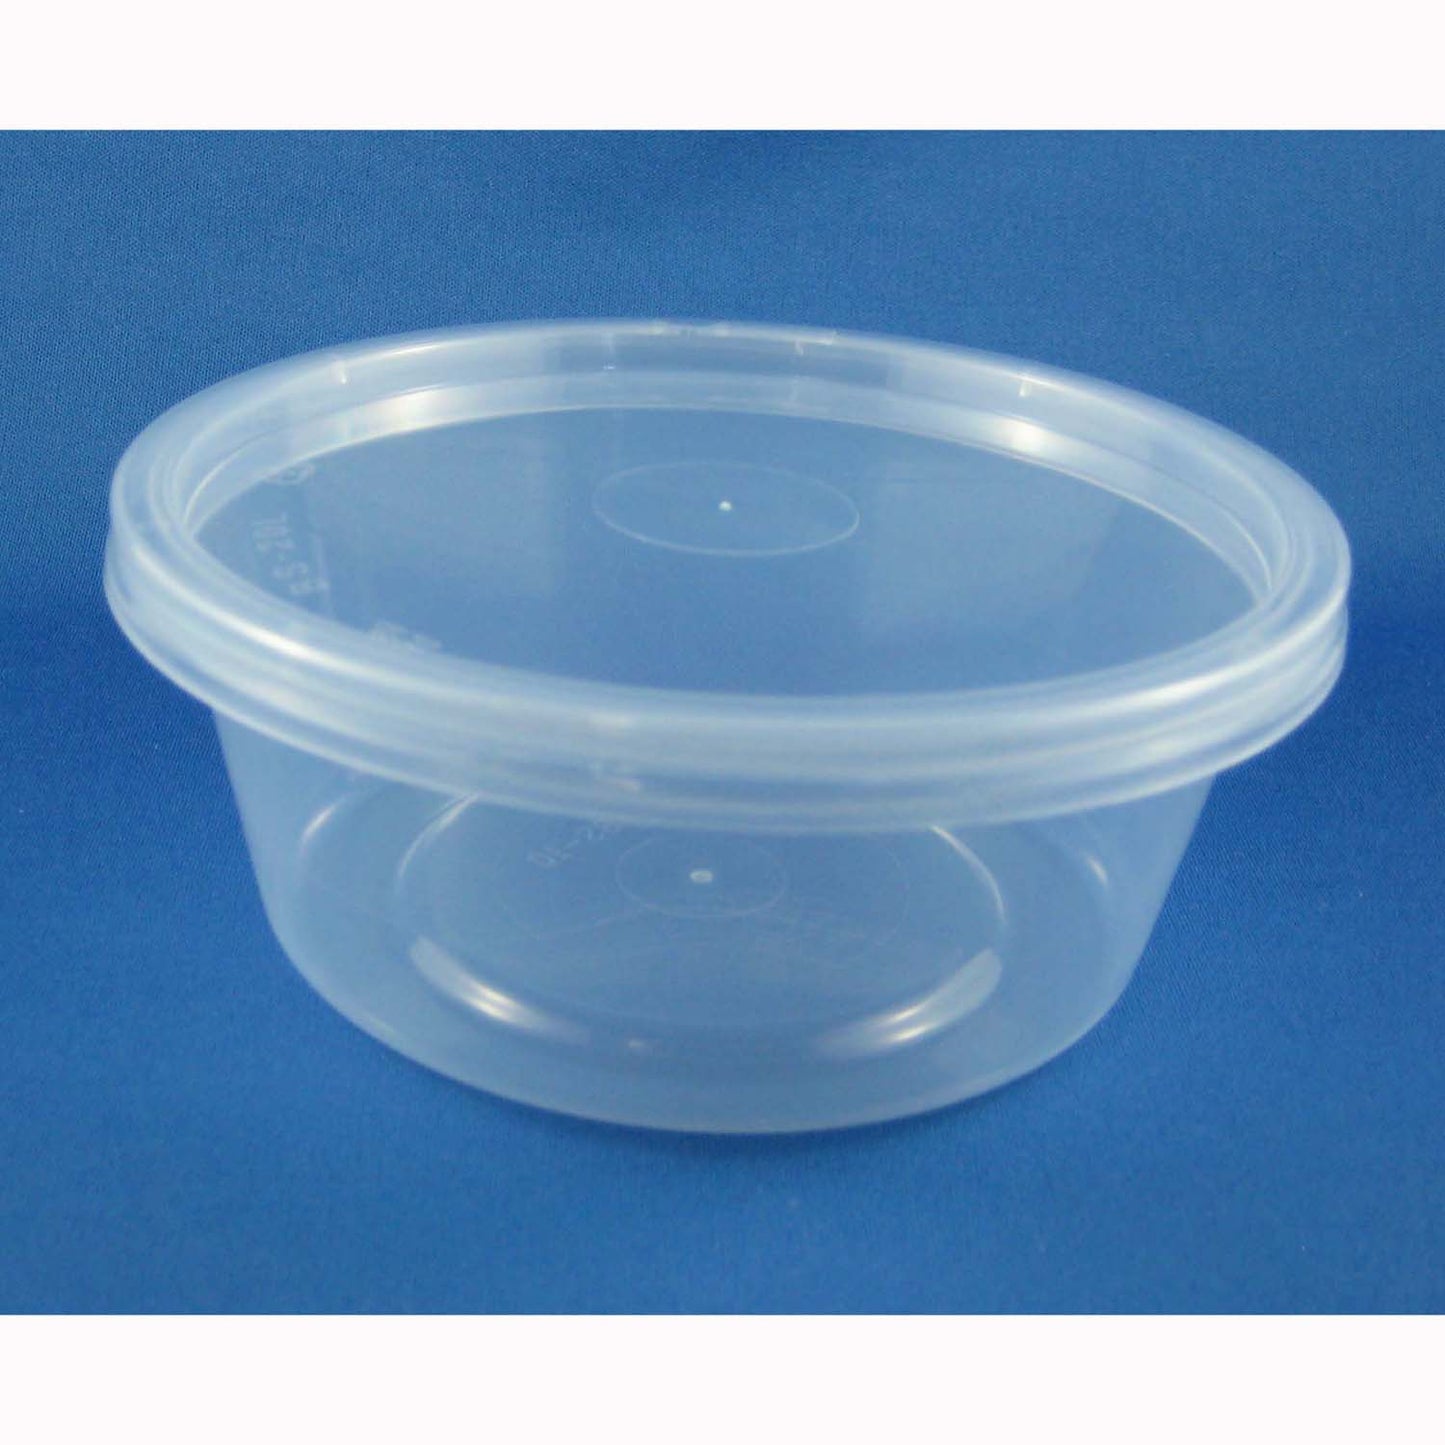 No 10 300ml Round Containers + Lid - Pack of 100